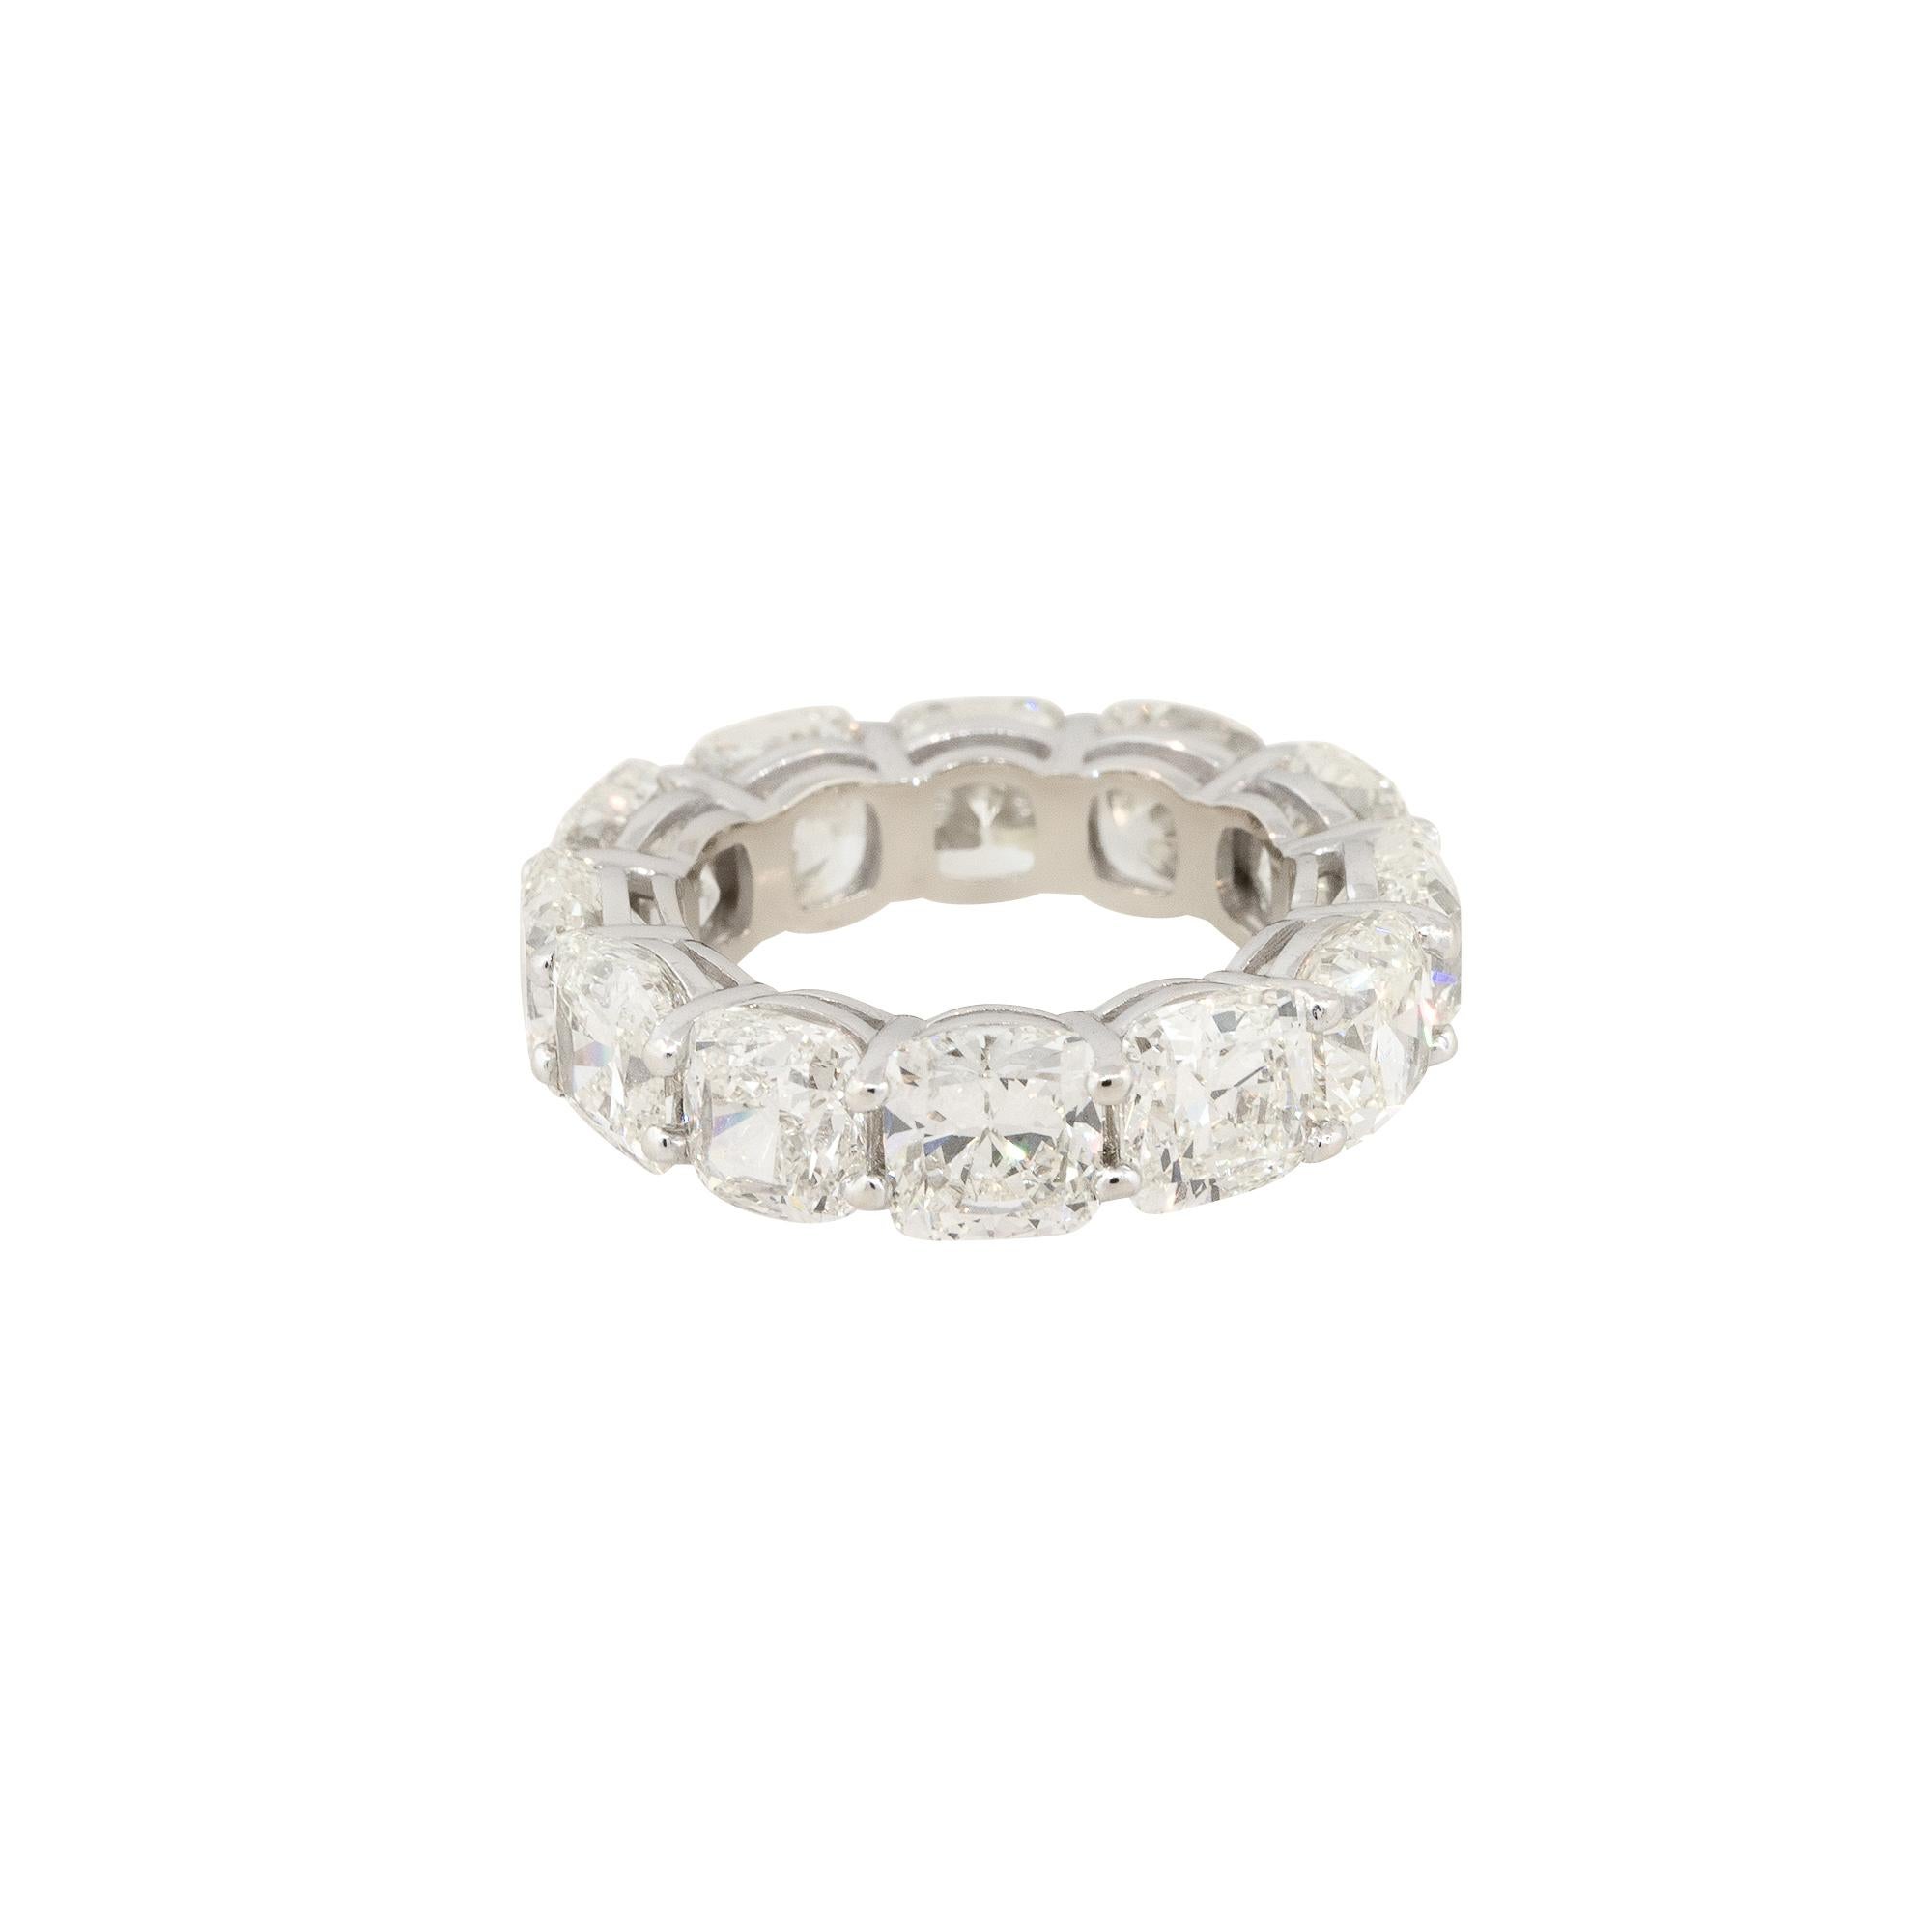 12.55 Carat Cushion Cut Diamond Eternity Band 14 Karat in Stock In Excellent Condition For Sale In Boca Raton, FL